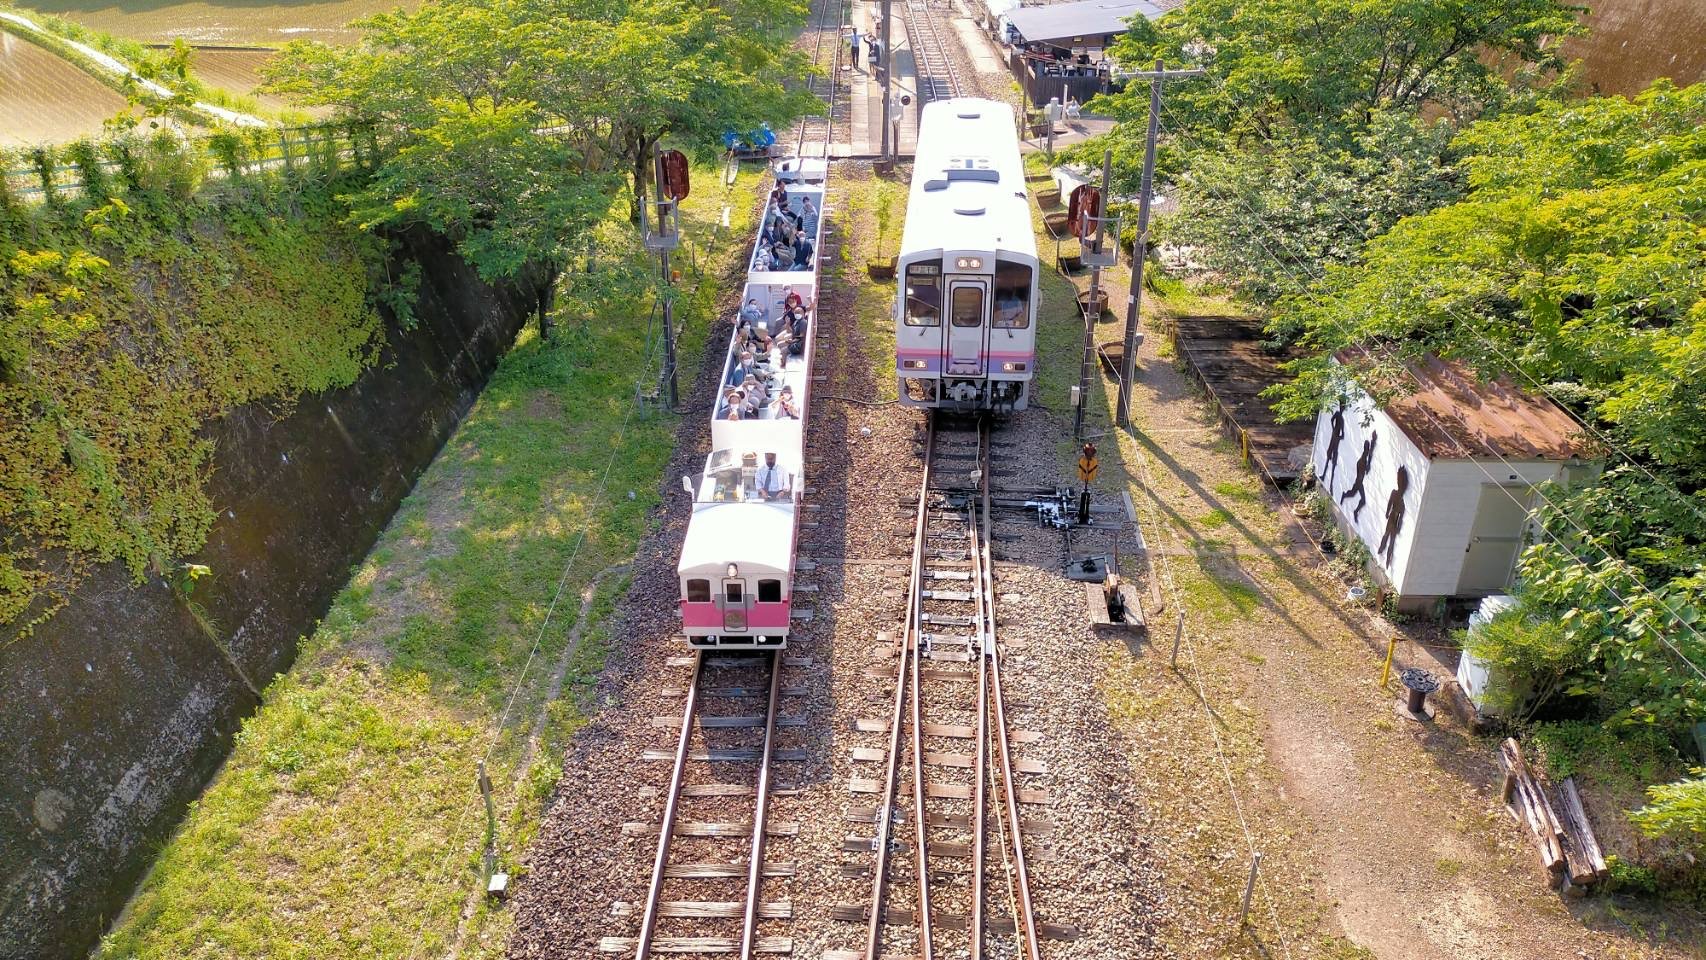 Ariel view of the Amaterasu Railway as it carries folks to their destination.